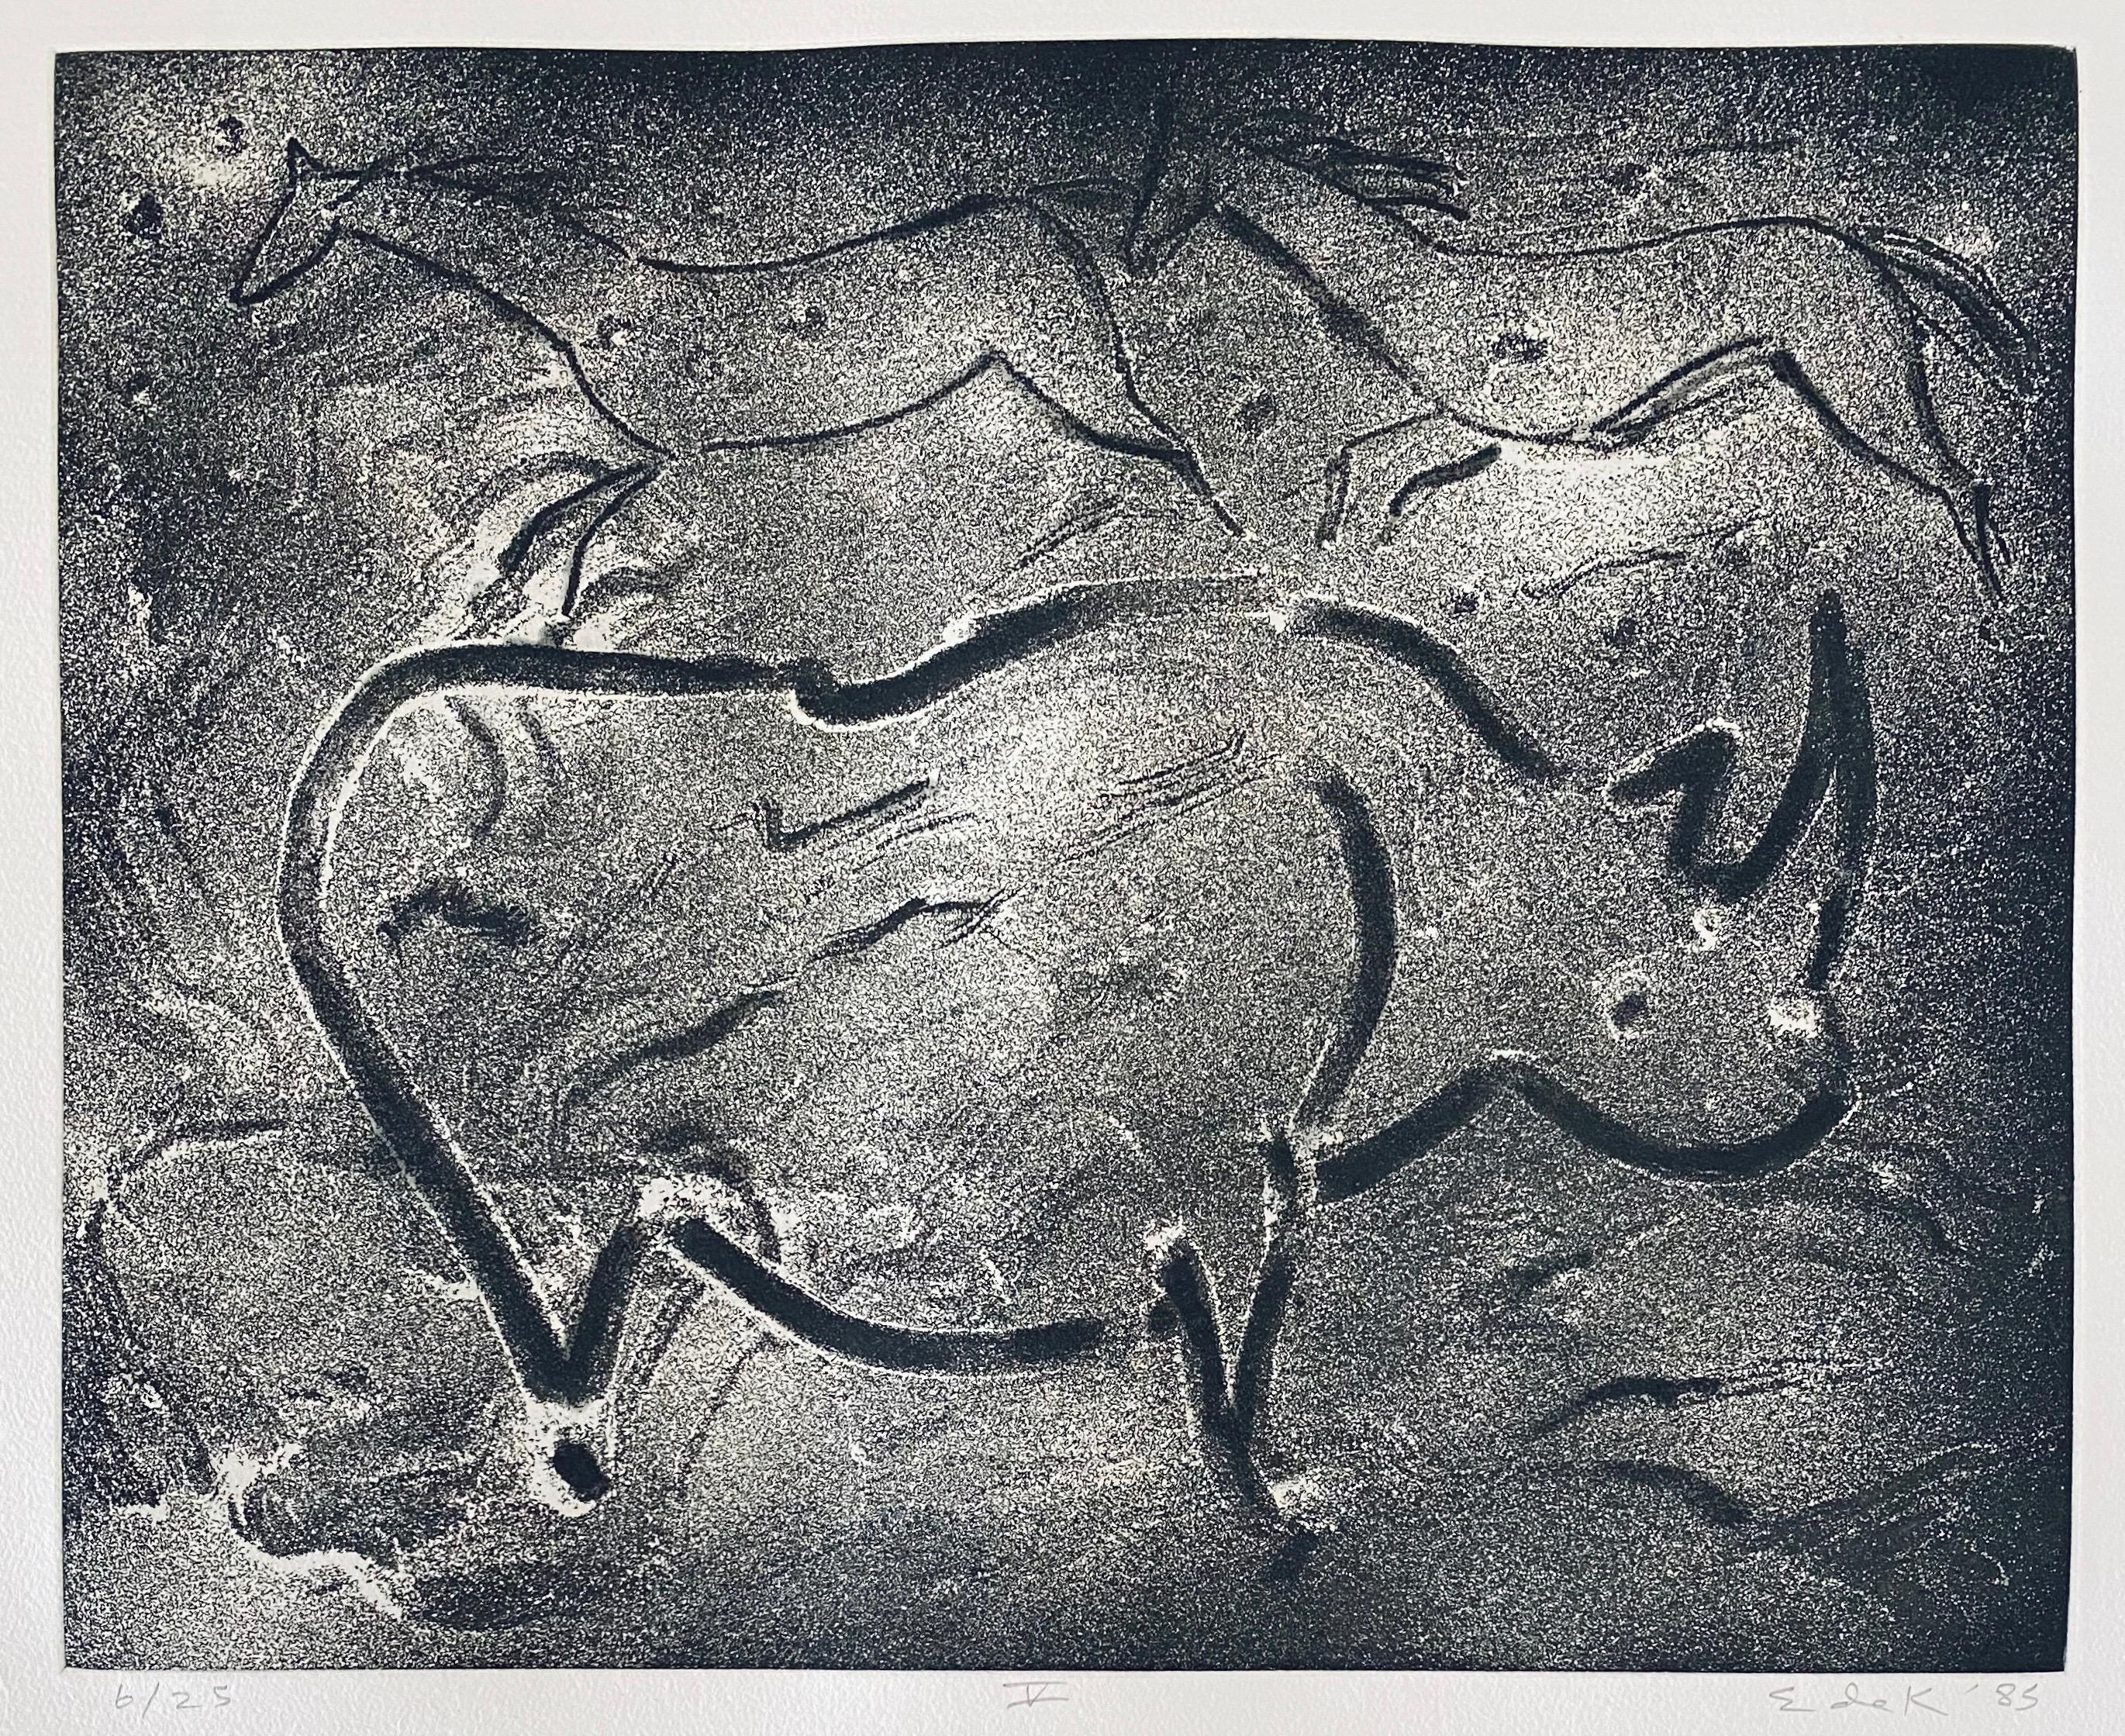 Aquatint etching. Crown Point Press, San Francisco. Edition of 25 
Hand signed in pencil. Torchlight Cave Drawing
Image size: seven measure 12 x 15" one measures 8 x 11". Paper size: 20 x 26¼

Elaine Marie Catherine de Kooning (née Fried) 1918 –